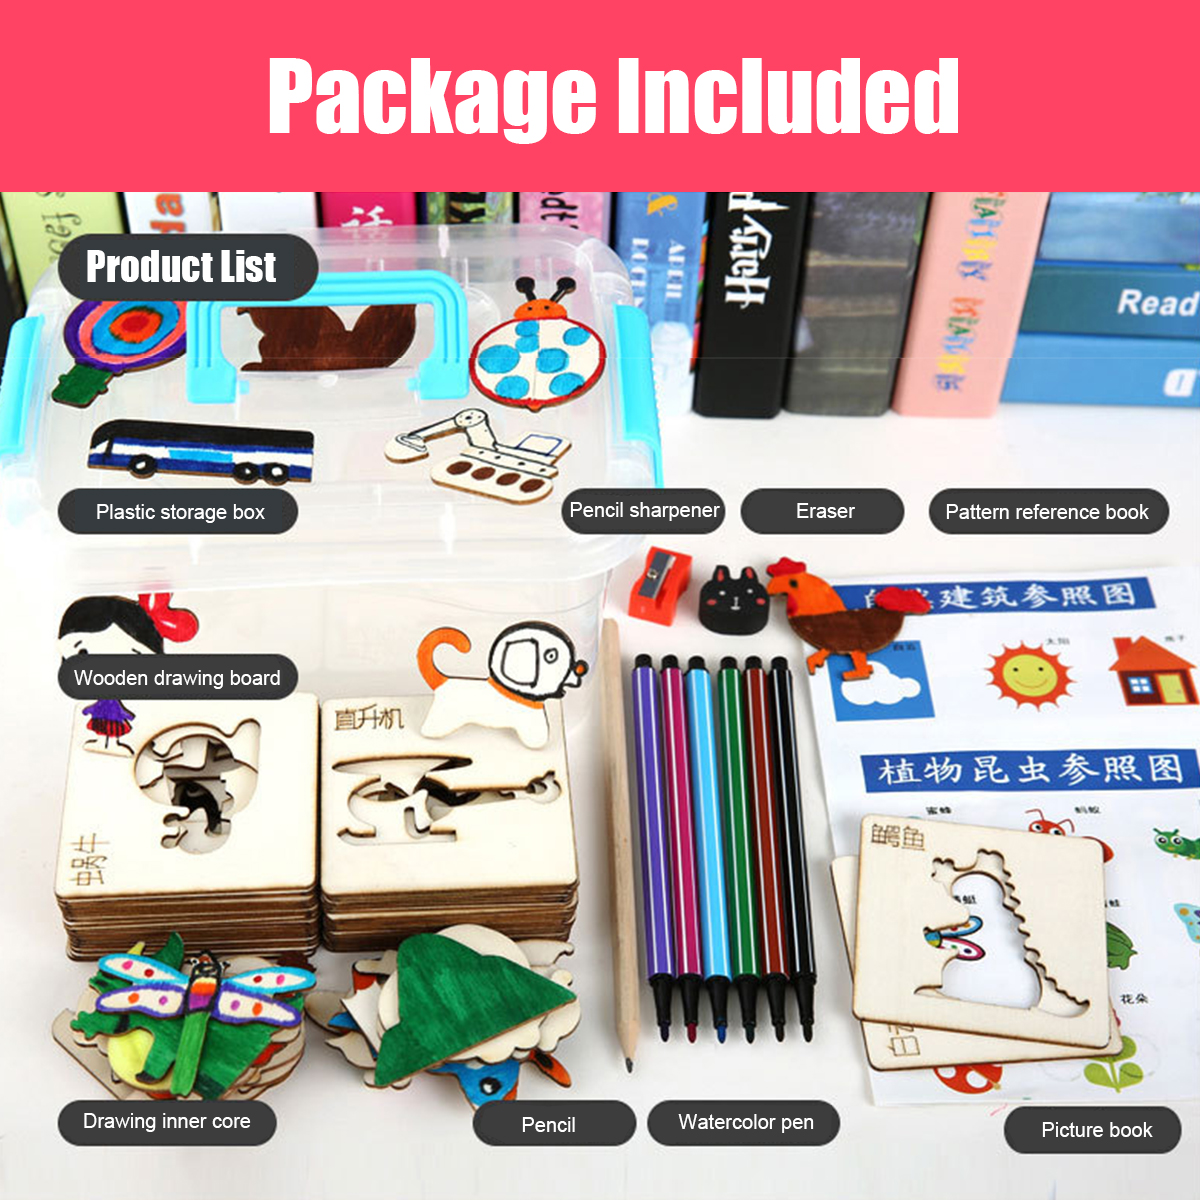 243660x-Color-Painting-Tools-Kit-Painting-Template-Graffiti-Kid-Handmade-Wooden-Toy-1658630-10